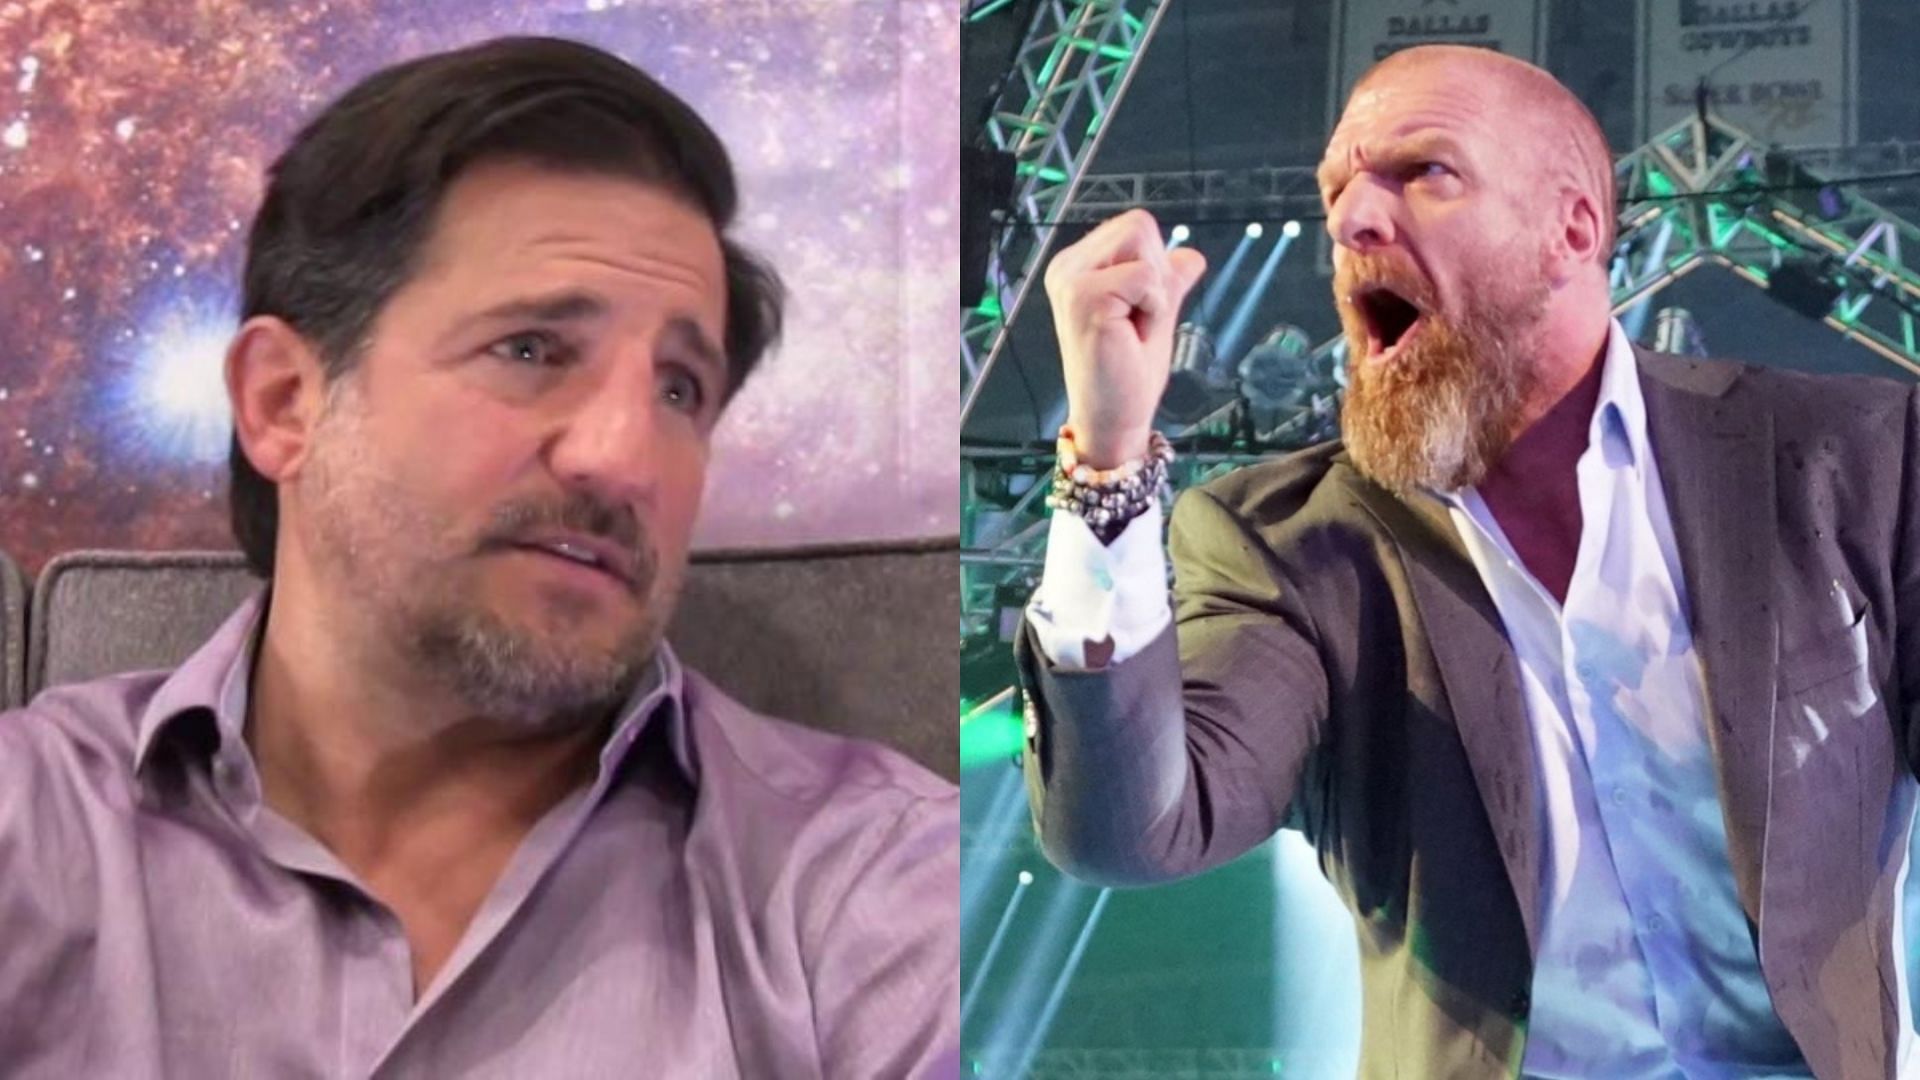 Disco Inferno has shared his thoughts about an AEW gimmick